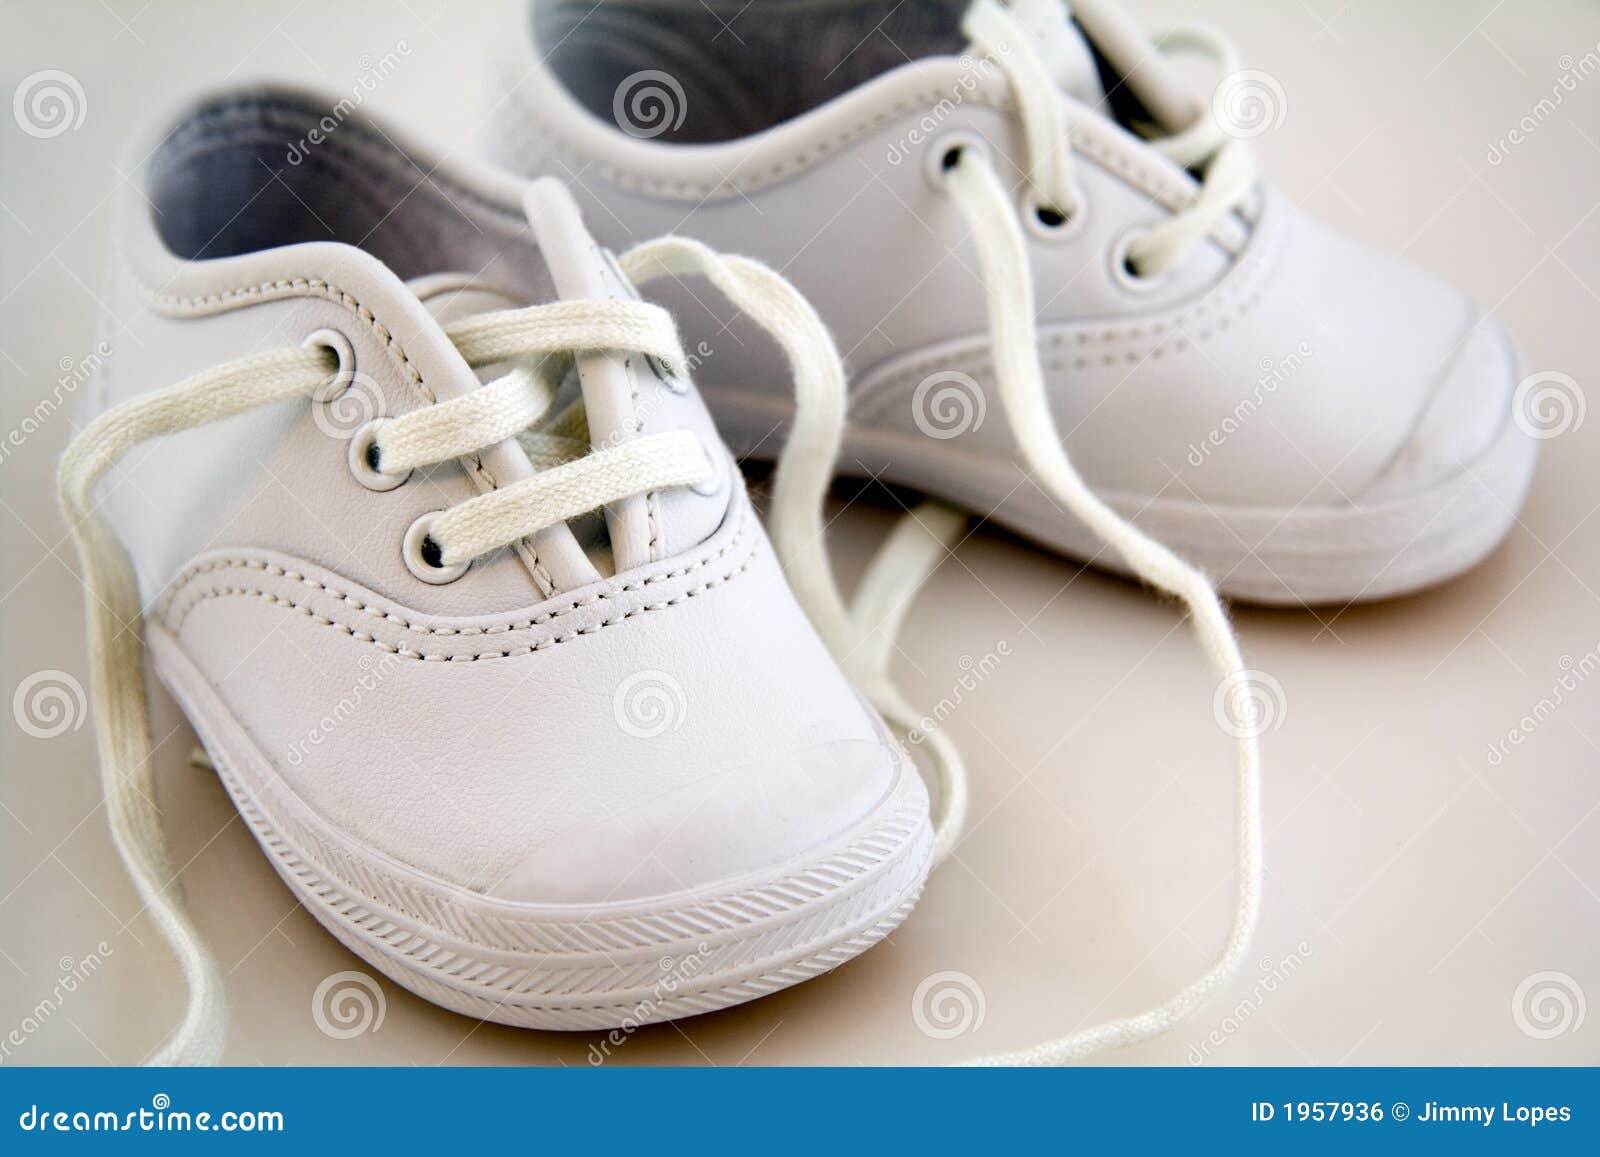 White Little Baby Shoes Royalty Free Stock Image - Image: 1957936